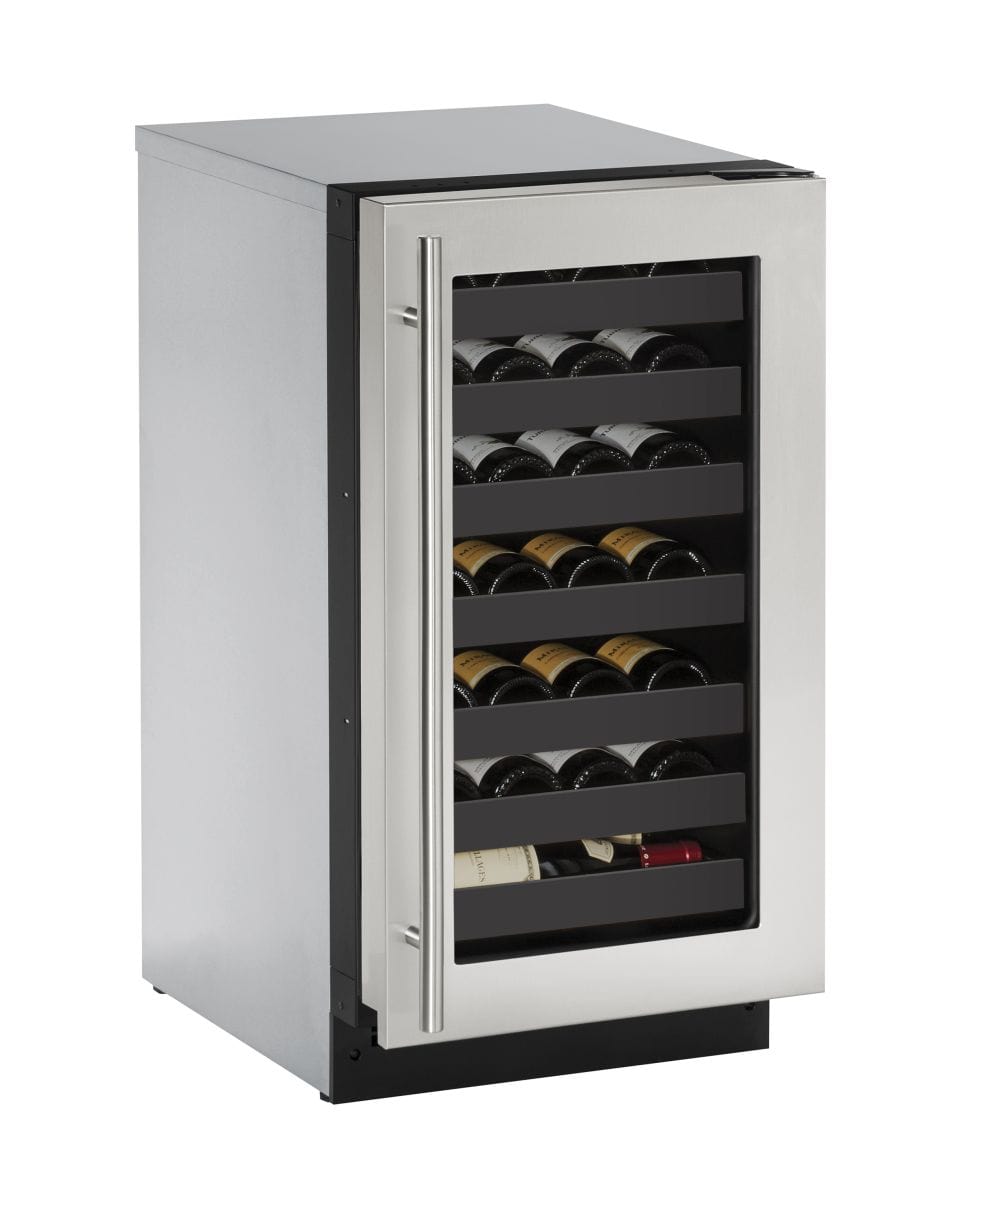 U-Line 2218WC 18" Wine Refrigerator Reversible Hinge Integrated/Stainless Frame Wine Coolers Empire